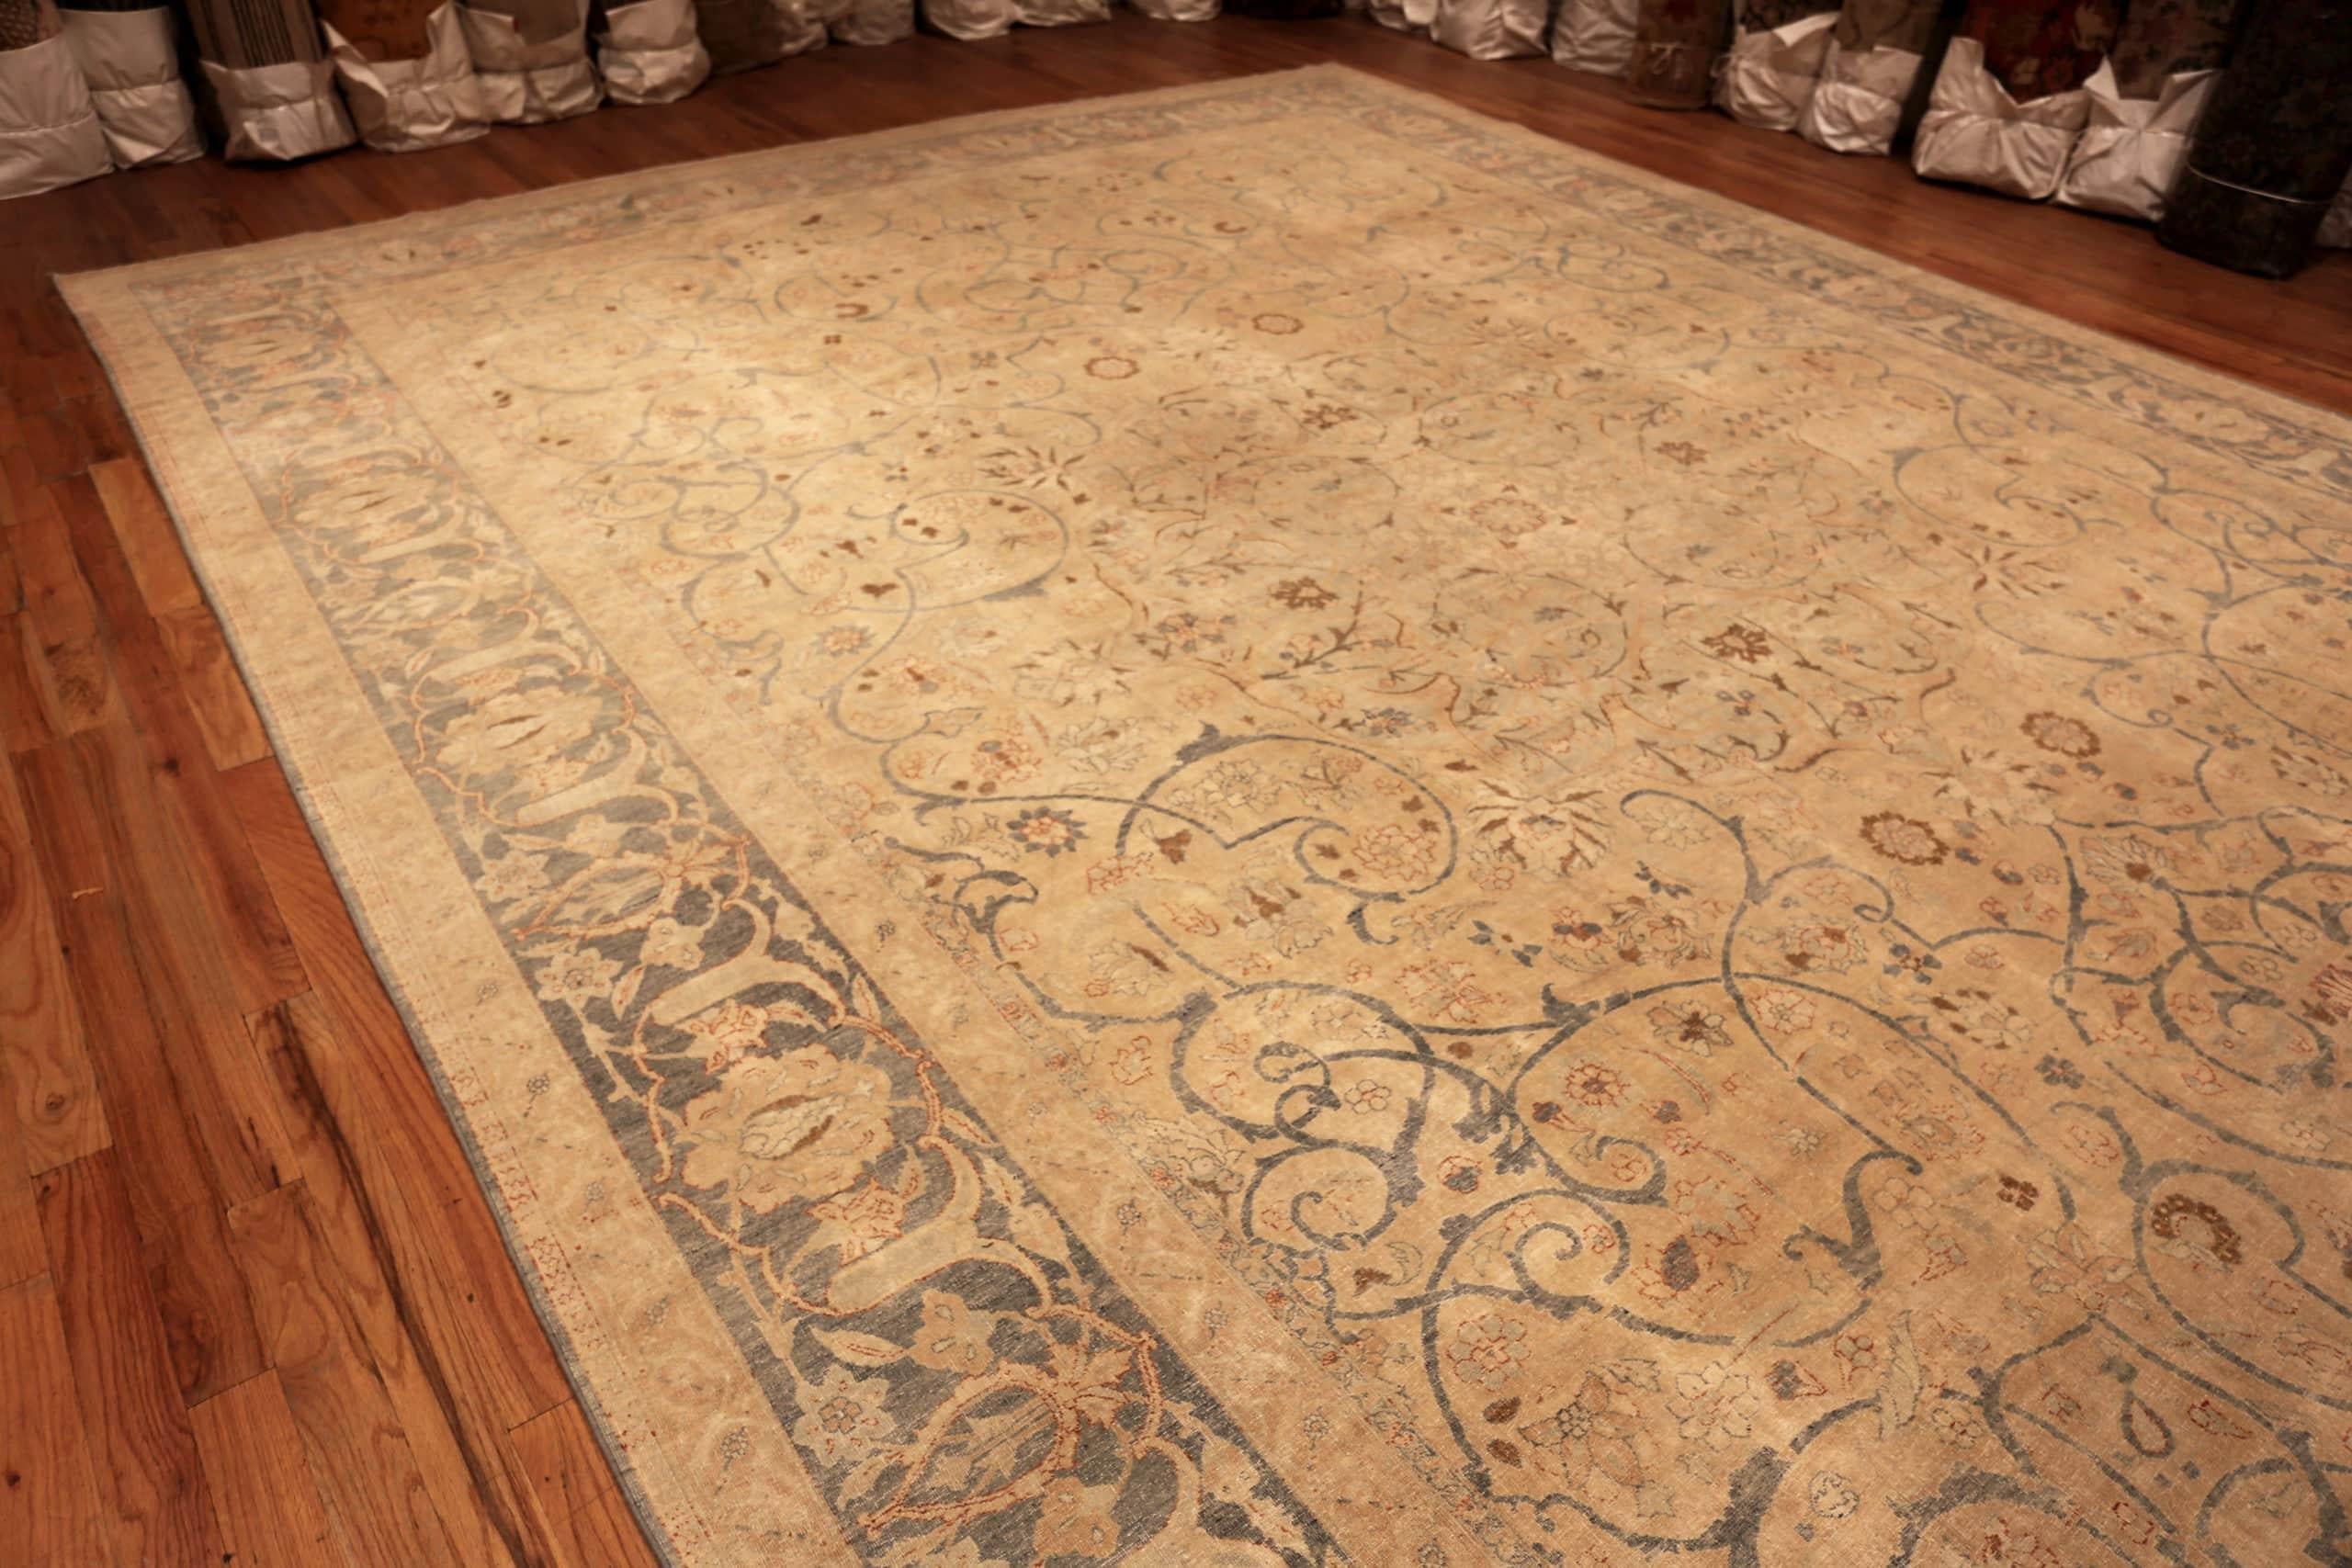 Antique Tabriz Persian Large Rug, Country of Origin: Persia, Circa date: 1920’s. Size: 14 ft x 19 ft 6 in (4.27 m x 5.94 m)

